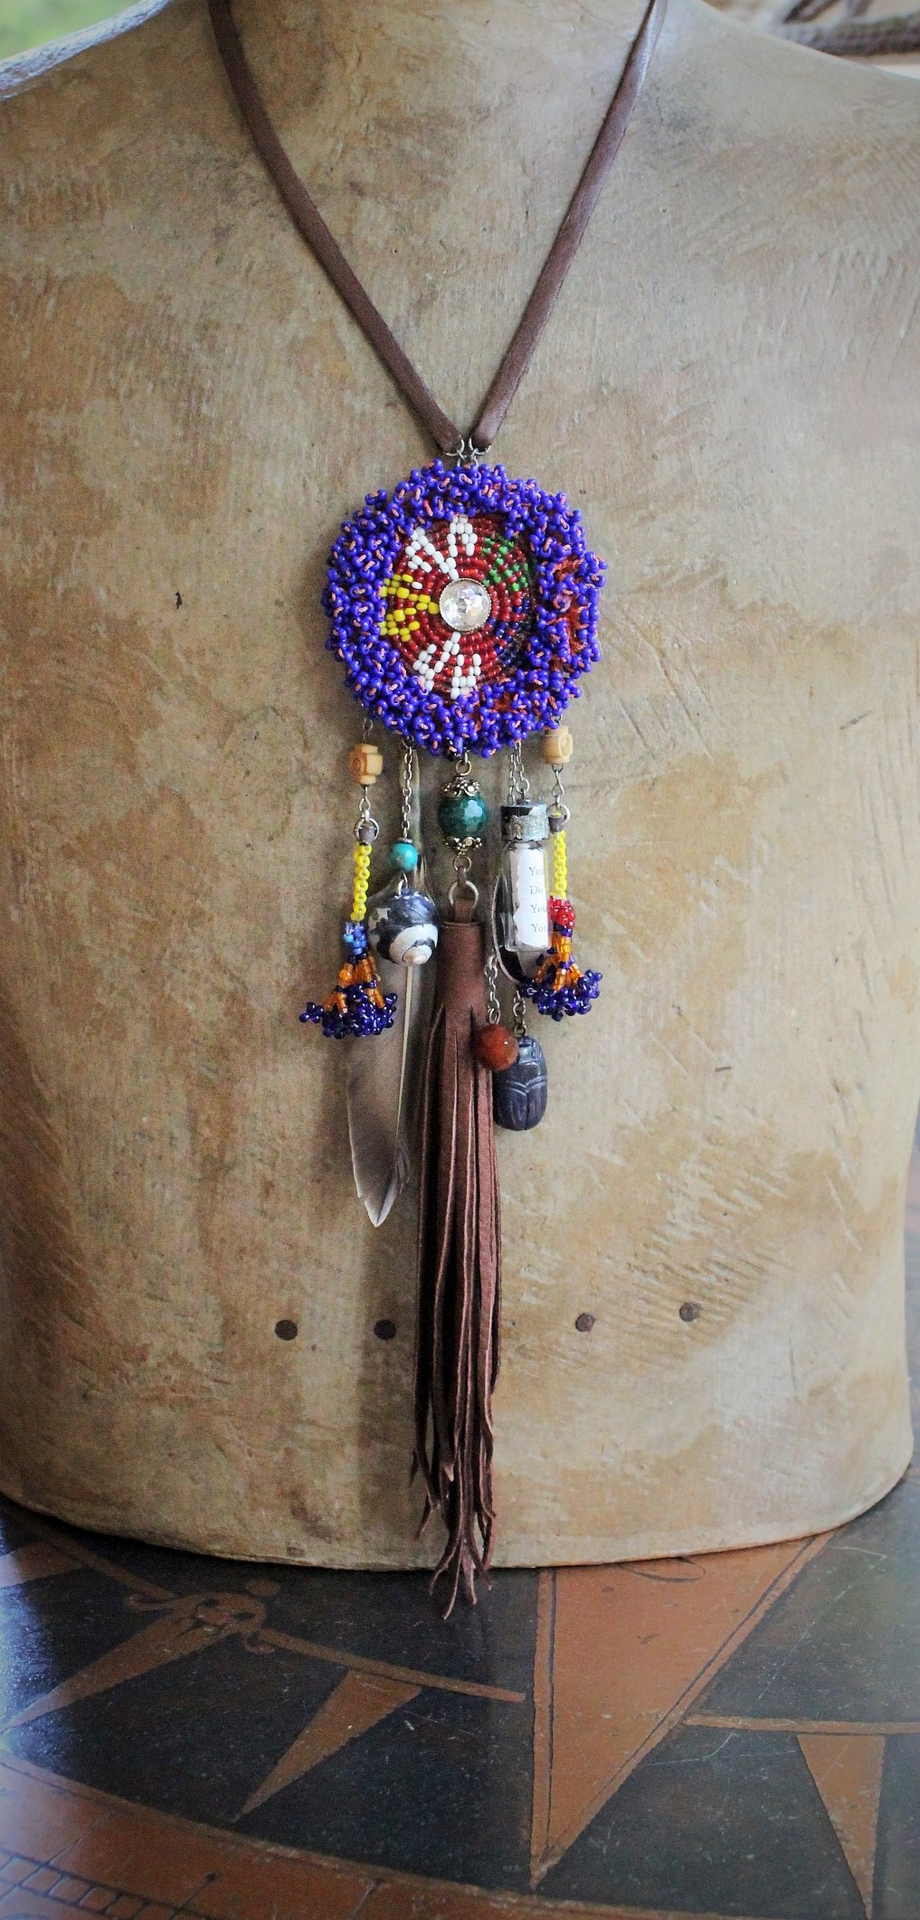 Everything you Need Amulet Necklace w/Antique Gypsy Beaded Finding,Antique Inlaid Crescent Moon,Artisan Butter Soft Leather Tassel & Ties + More!